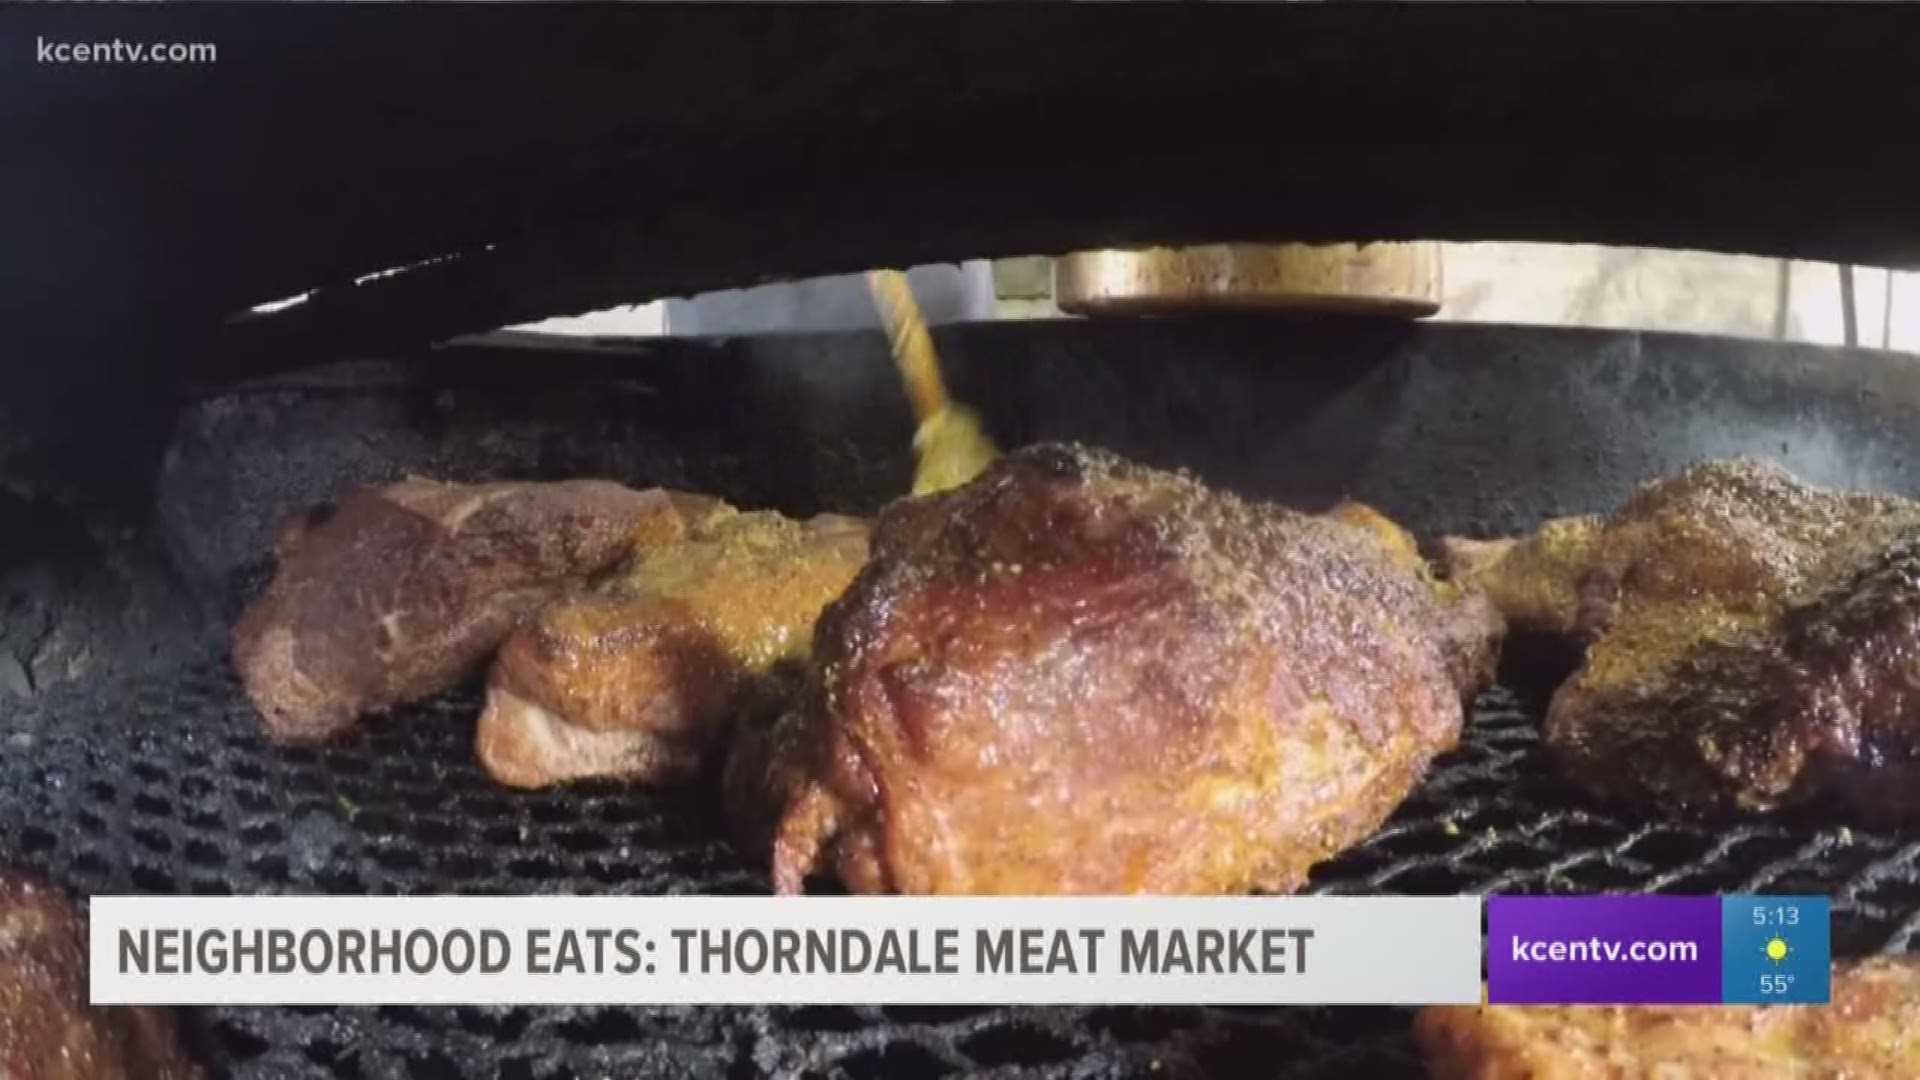 In this edition of Neighborhood Eats, reporter Jamie Kennedy enjoys smokey meat in a classic, family-owned Texas barbecue at Thorndale Meat Market.